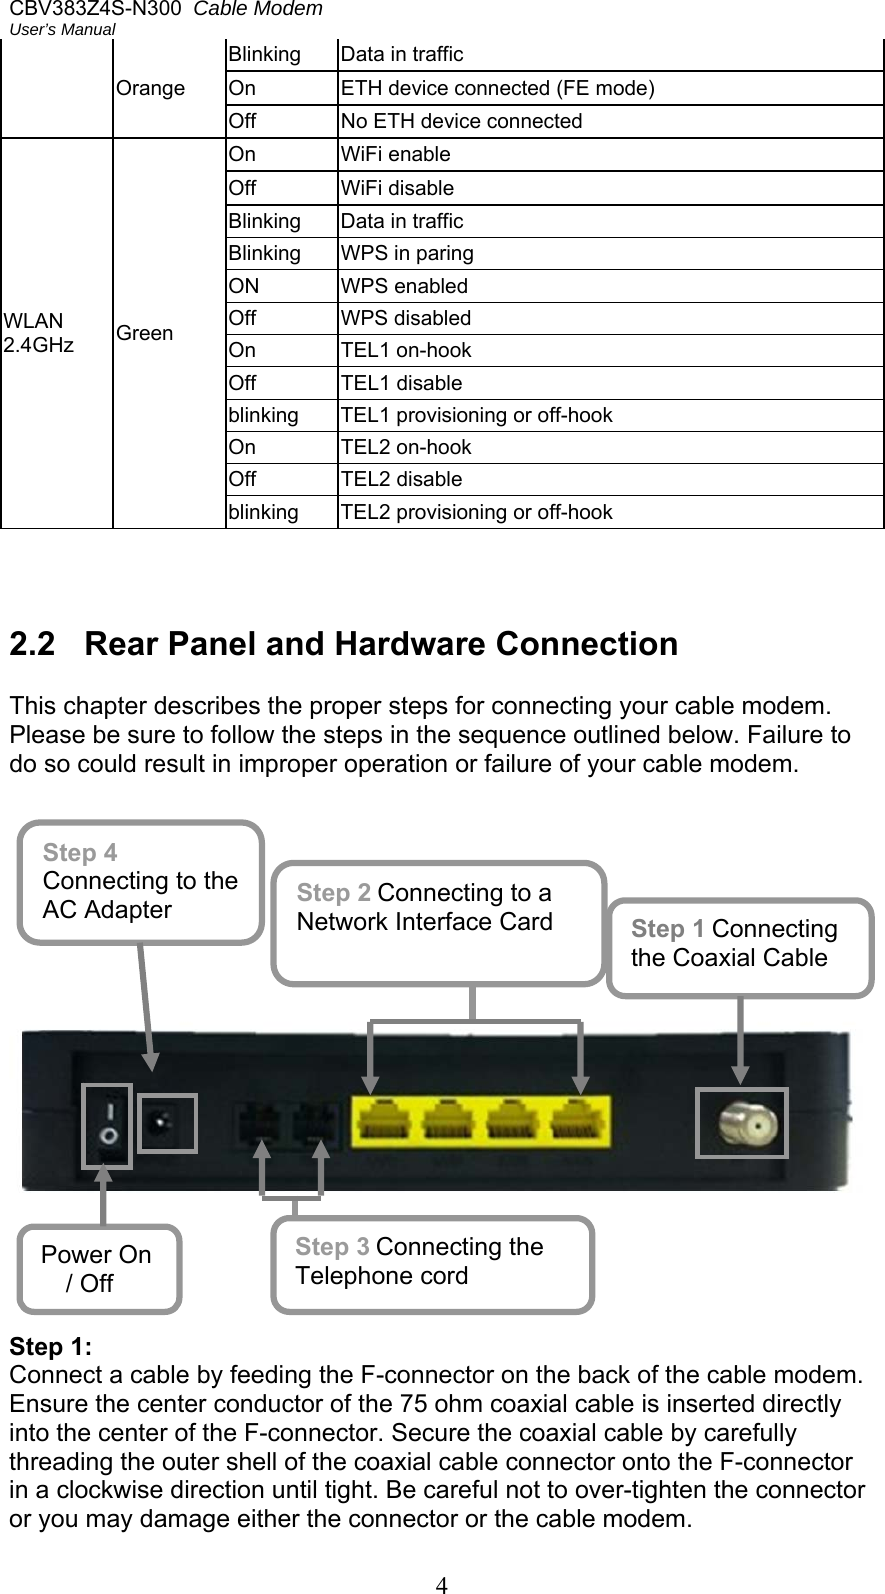 CBV383Z4S-N300  Cable Modem  User’s Manual 4 Orange  Blinking  Data in traffic On   ETH device connected (FE mode) Off   No ETH device connected  WLAN 2.4GHz  Green On   WiFi enable Off   WiFi disable Blinking  Data in traffic Blinking  WPS in paring ON  WPS enabled Off  WPS disabled  On   TEL1 on-hook Off   TEL1 disable blinking  TEL1 provisioning or off-hook On   TEL2 on-hook Off   TEL2 disable blinking  TEL2 provisioning or off-hook    2.2  Rear Panel and Hardware Connection  This chapter describes the proper steps for connecting your cable modem. Please be sure to follow the steps in the sequence outlined below. Failure to do so could result in improper operation or failure of your cable modem.              Step 1: Connect a cable by feeding the F-connector on the back of the cable modem. Ensure the center conductor of the 75 ohm coaxial cable is inserted directly into the center of the F-connector. Secure the coaxial cable by carefully threading the outer shell of the coaxial cable connector onto the F-connector in a clockwise direction until tight. Be careful not to over-tighten the connector or you may damage either the connector or the cable modem. Step 1 Connecting the Coaxial Cable Step 3 Connecting the Telephone cord Step 4 Connecting to the AC Adapter Step 2 Connecting to a Network Interface Card Power On / Off 